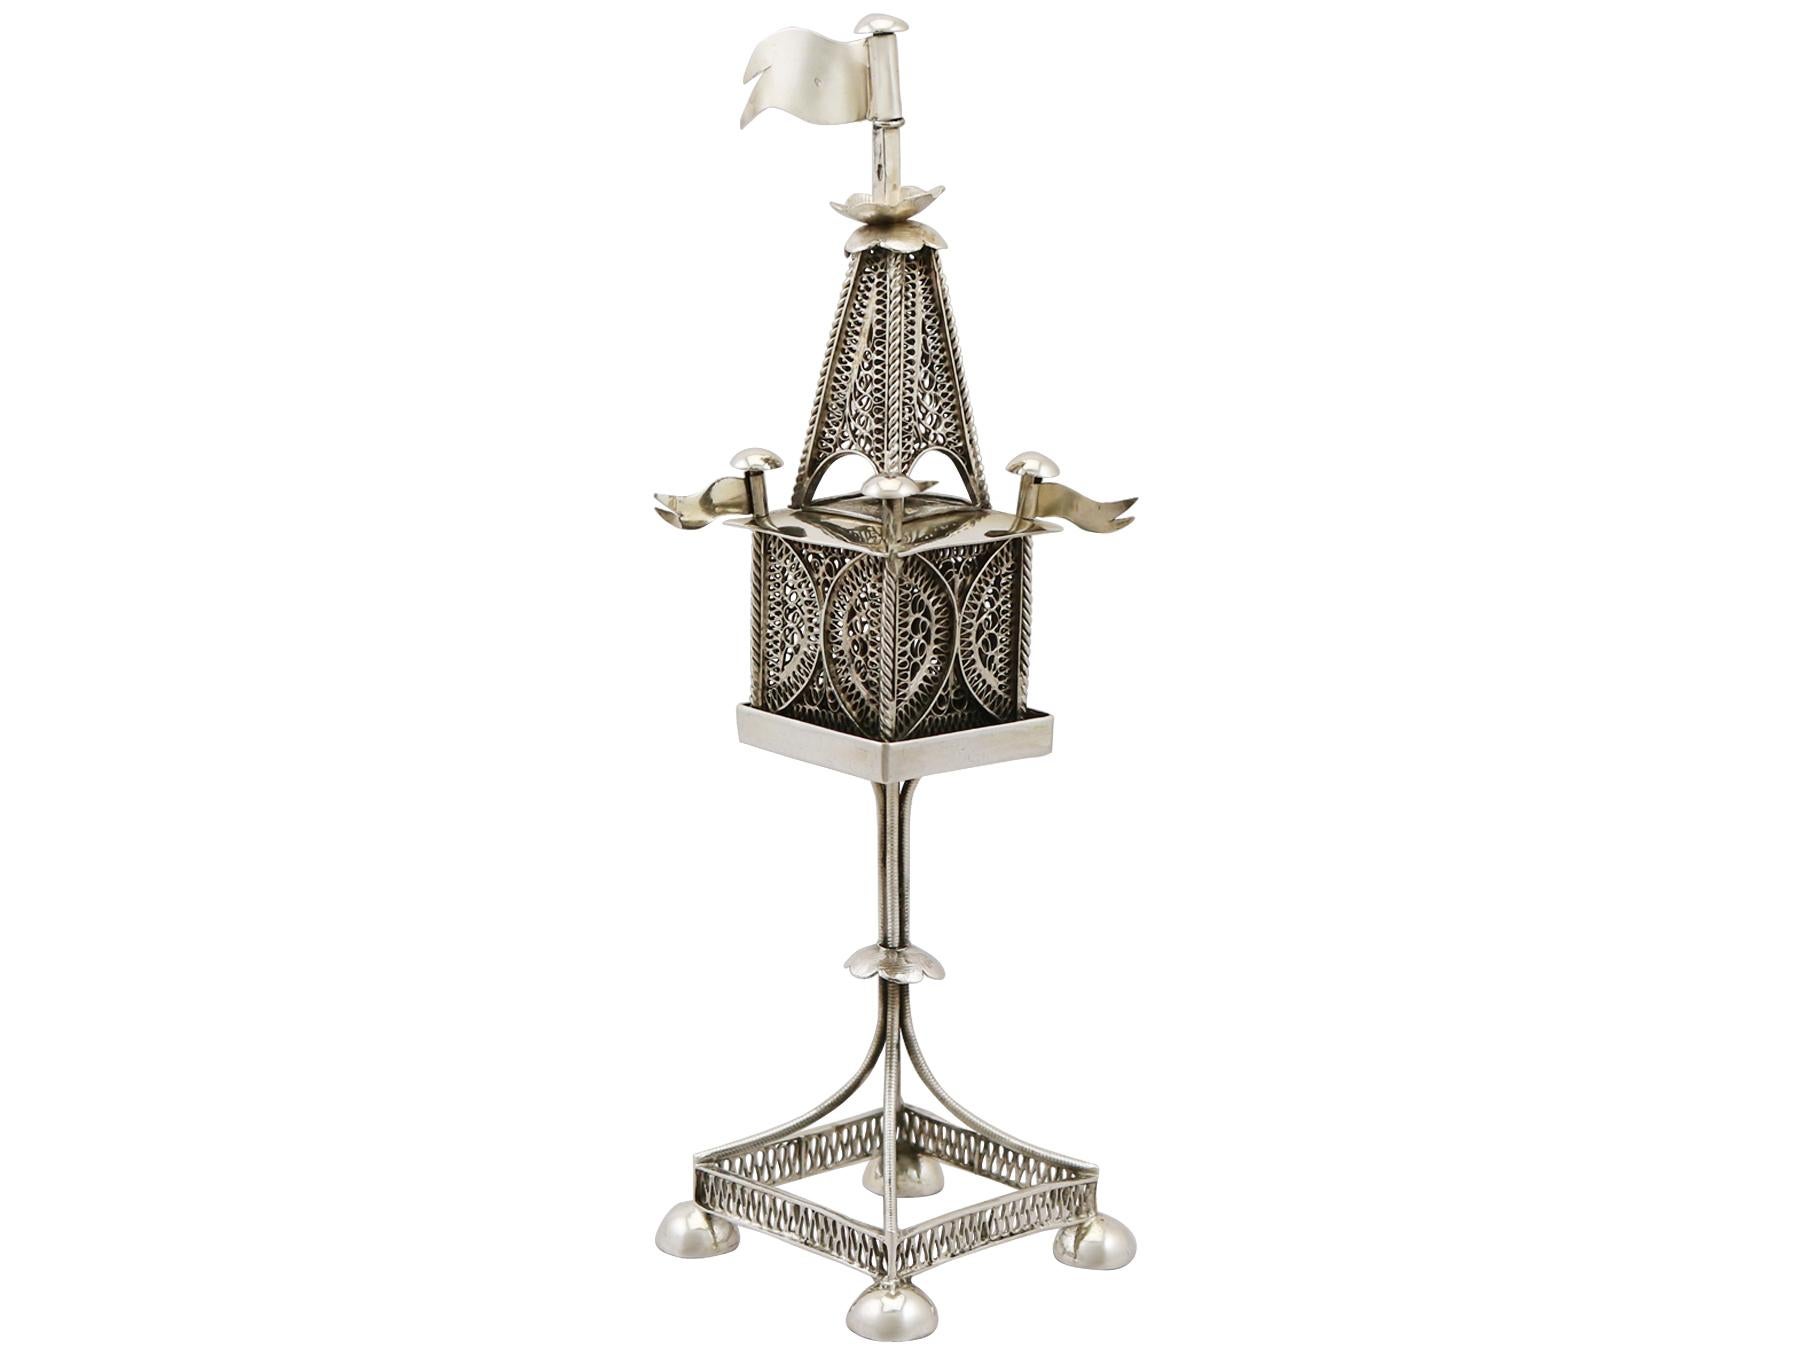 Early 20th Century 1900s Antique Austro-Hungarian Silver Spice Tower For Sale